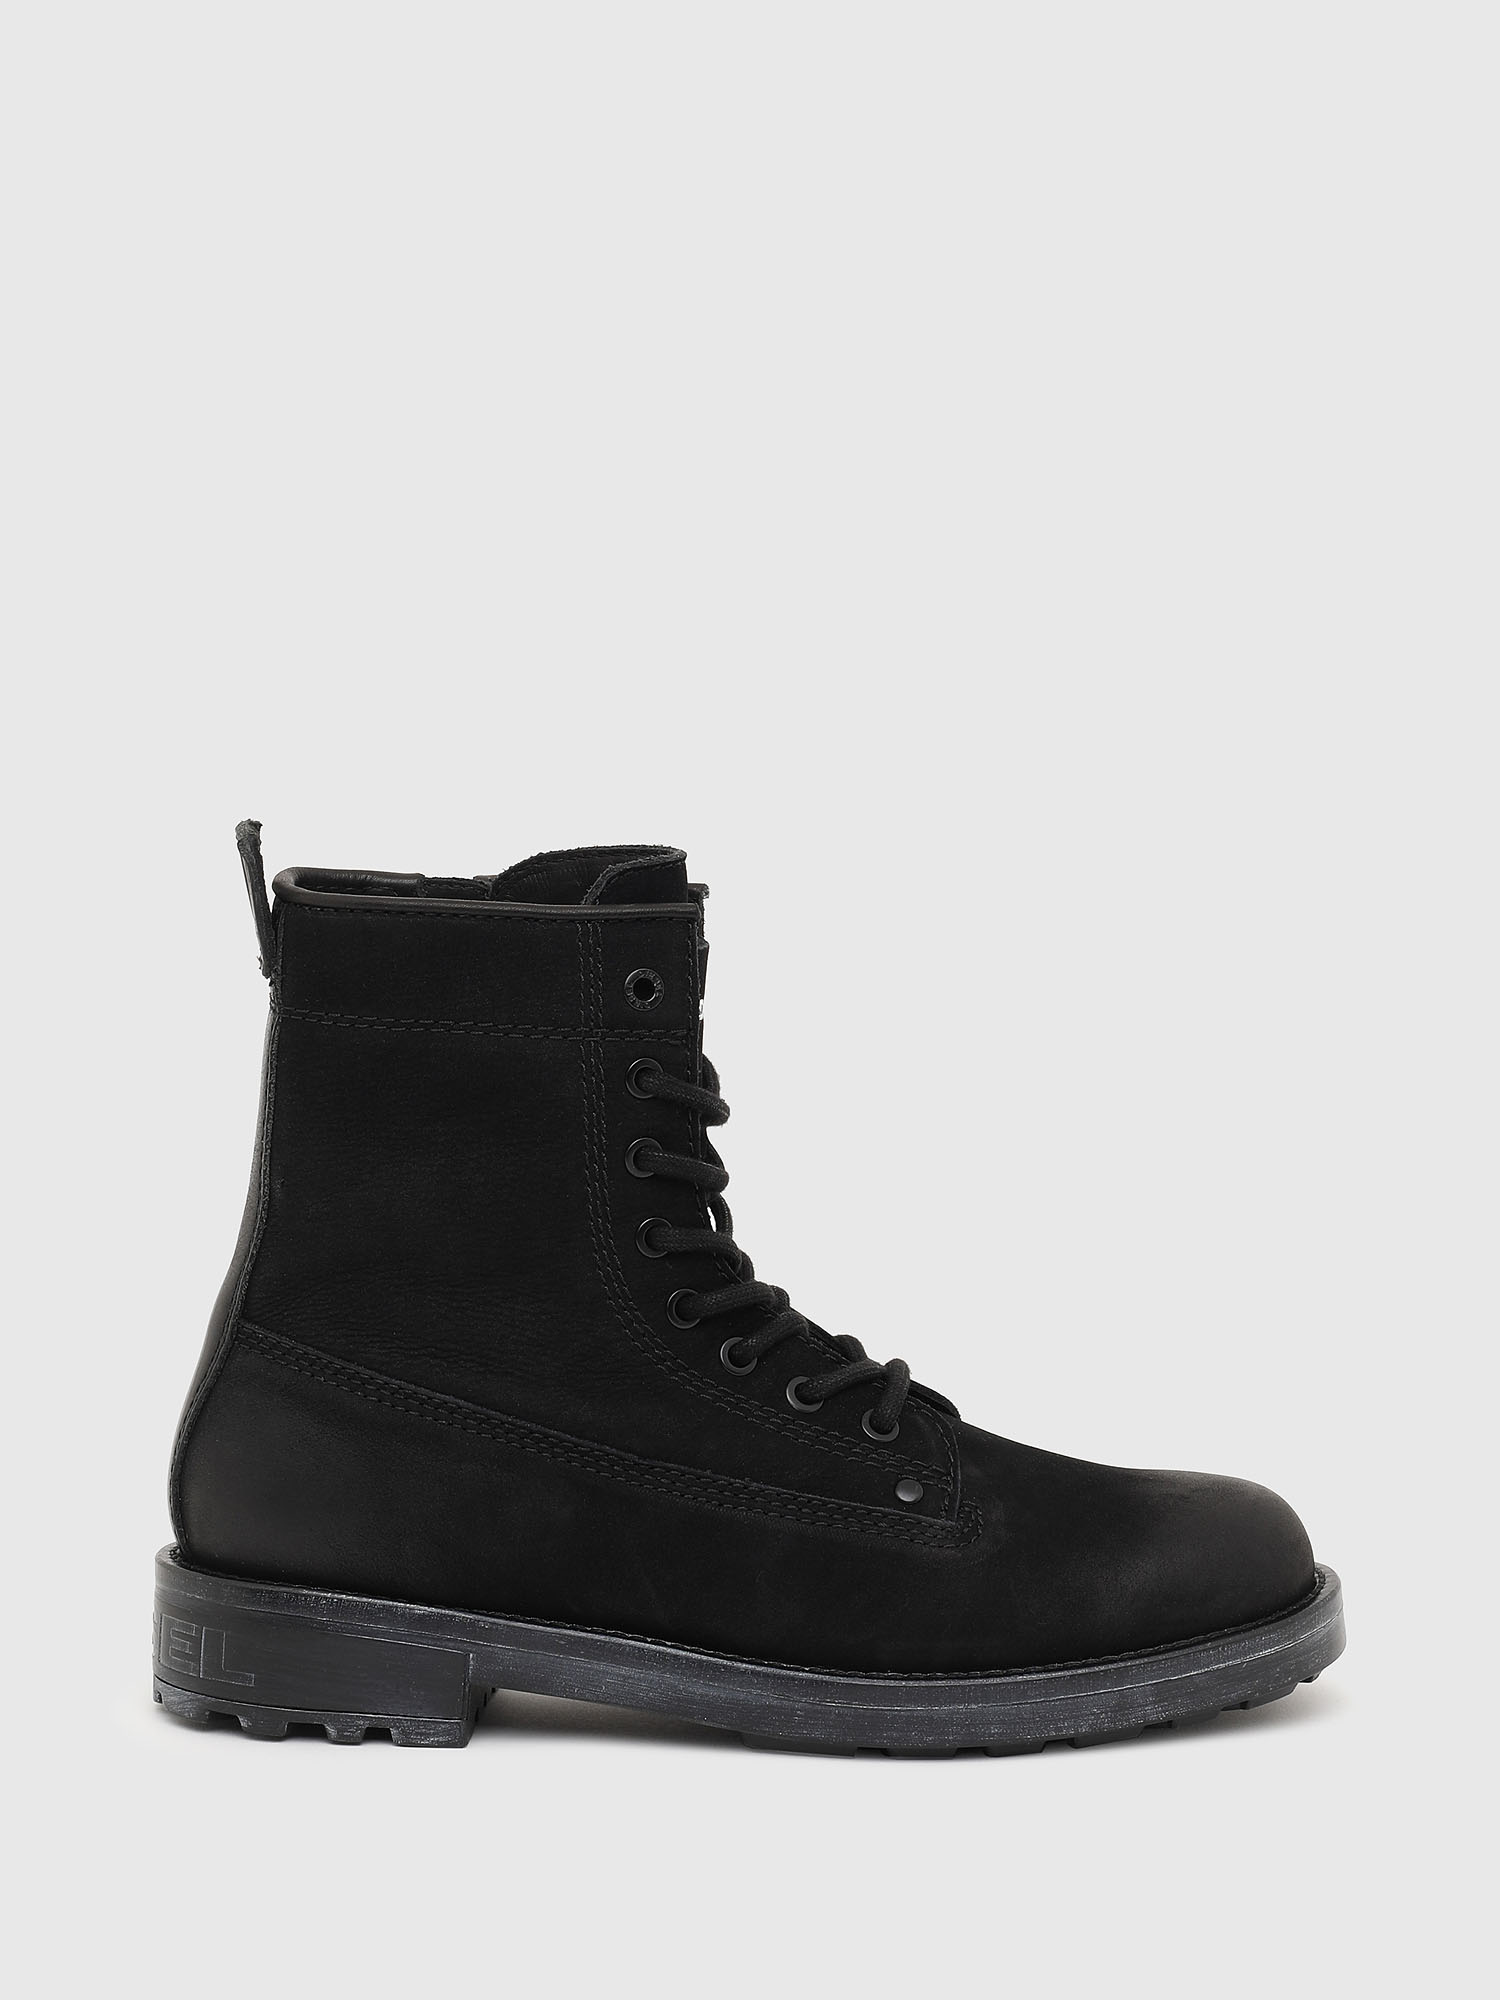 D-THROUPER DBB ZC W Woman: Combat boots in washed leather | Diesel